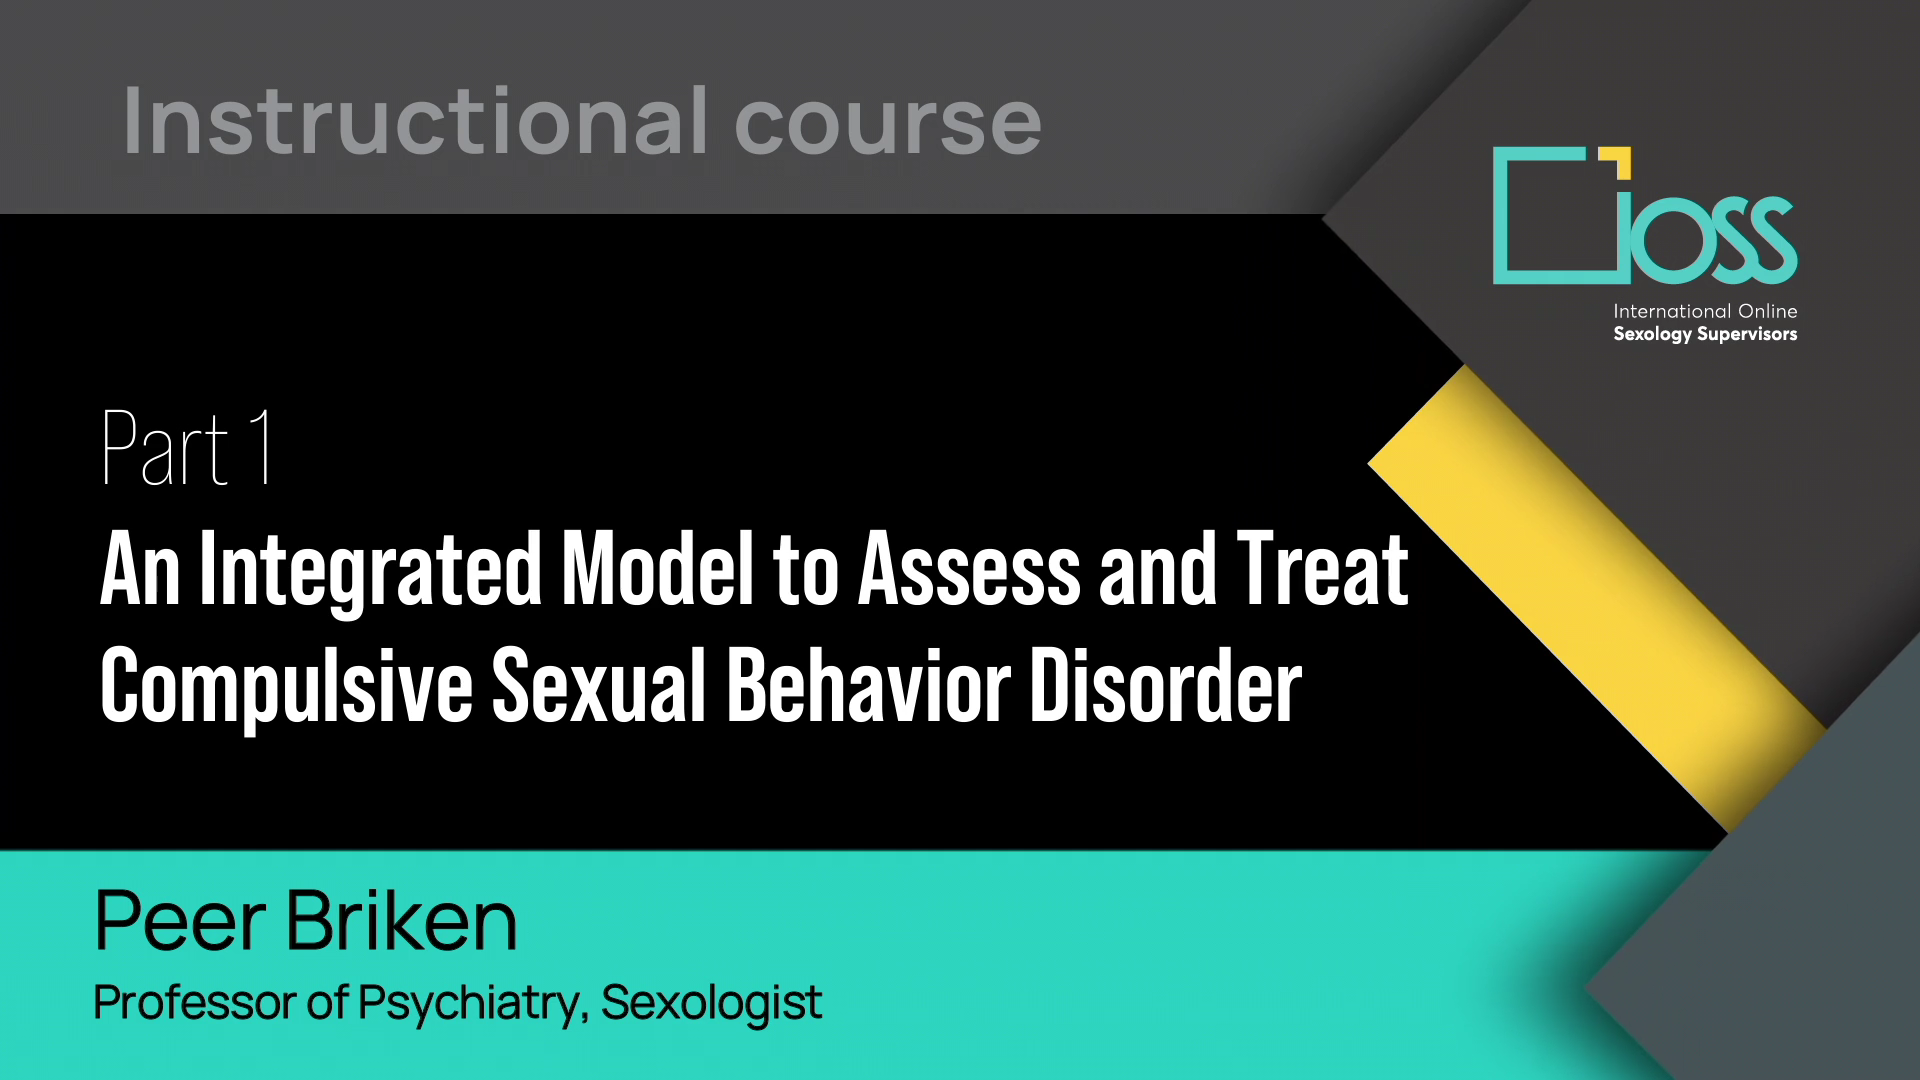 Part 1 An Integrated Model to Assess and Treat Compulsive Sexual Behavior Disorder (Part 1 & 2)